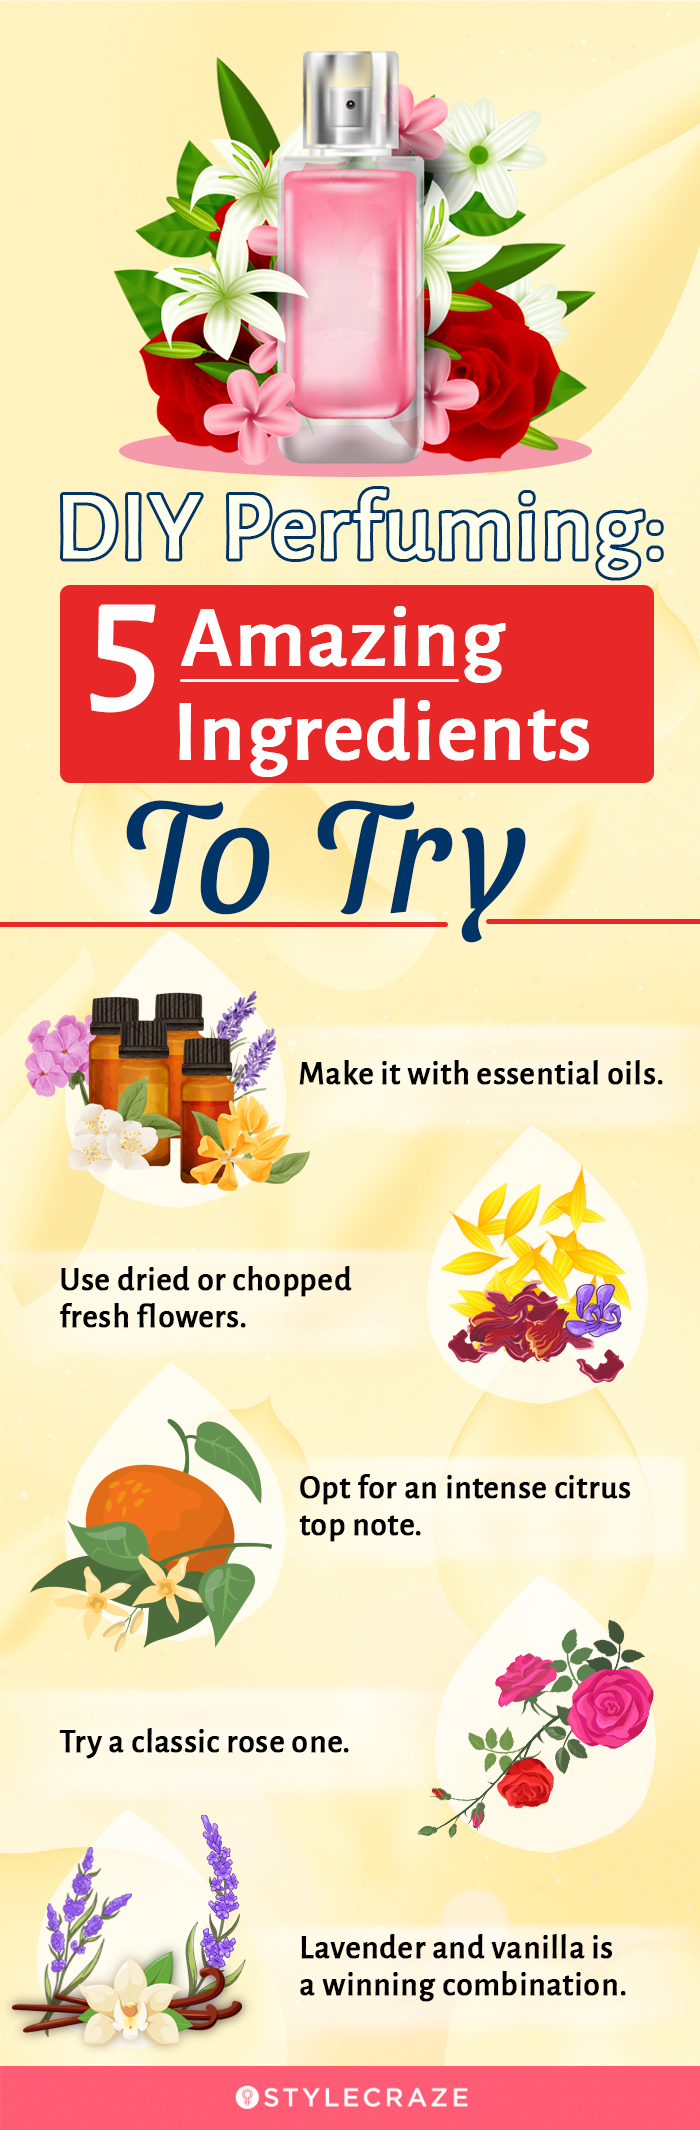 diy perfuming 5 amazing ingredients to try (infographic)